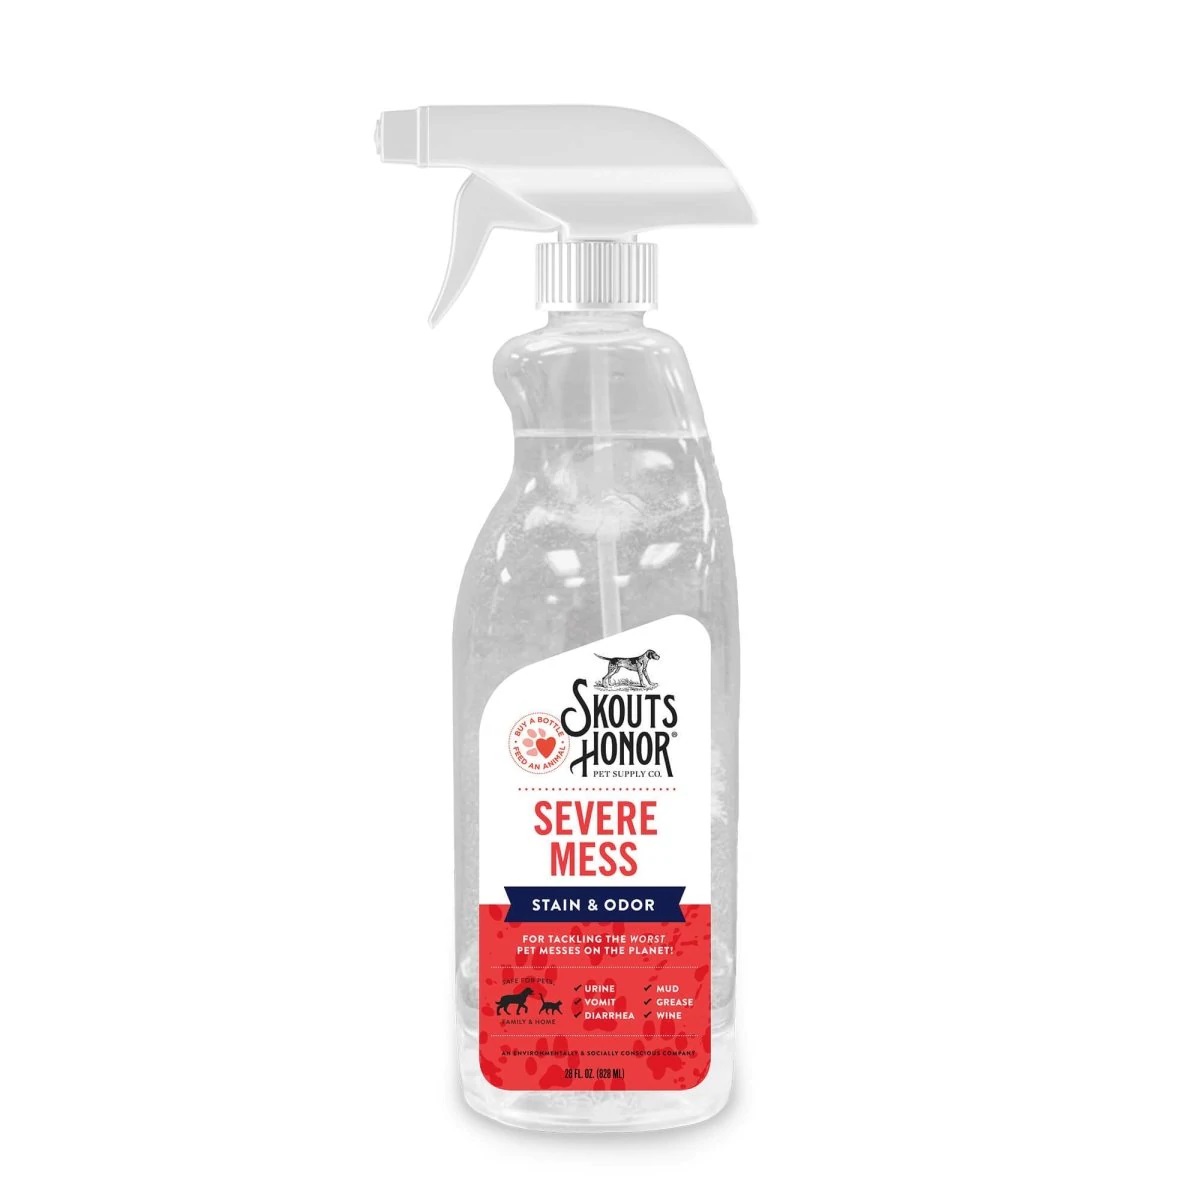 Skout's Honor Severe Mess Stain & Odor, 28 oz.